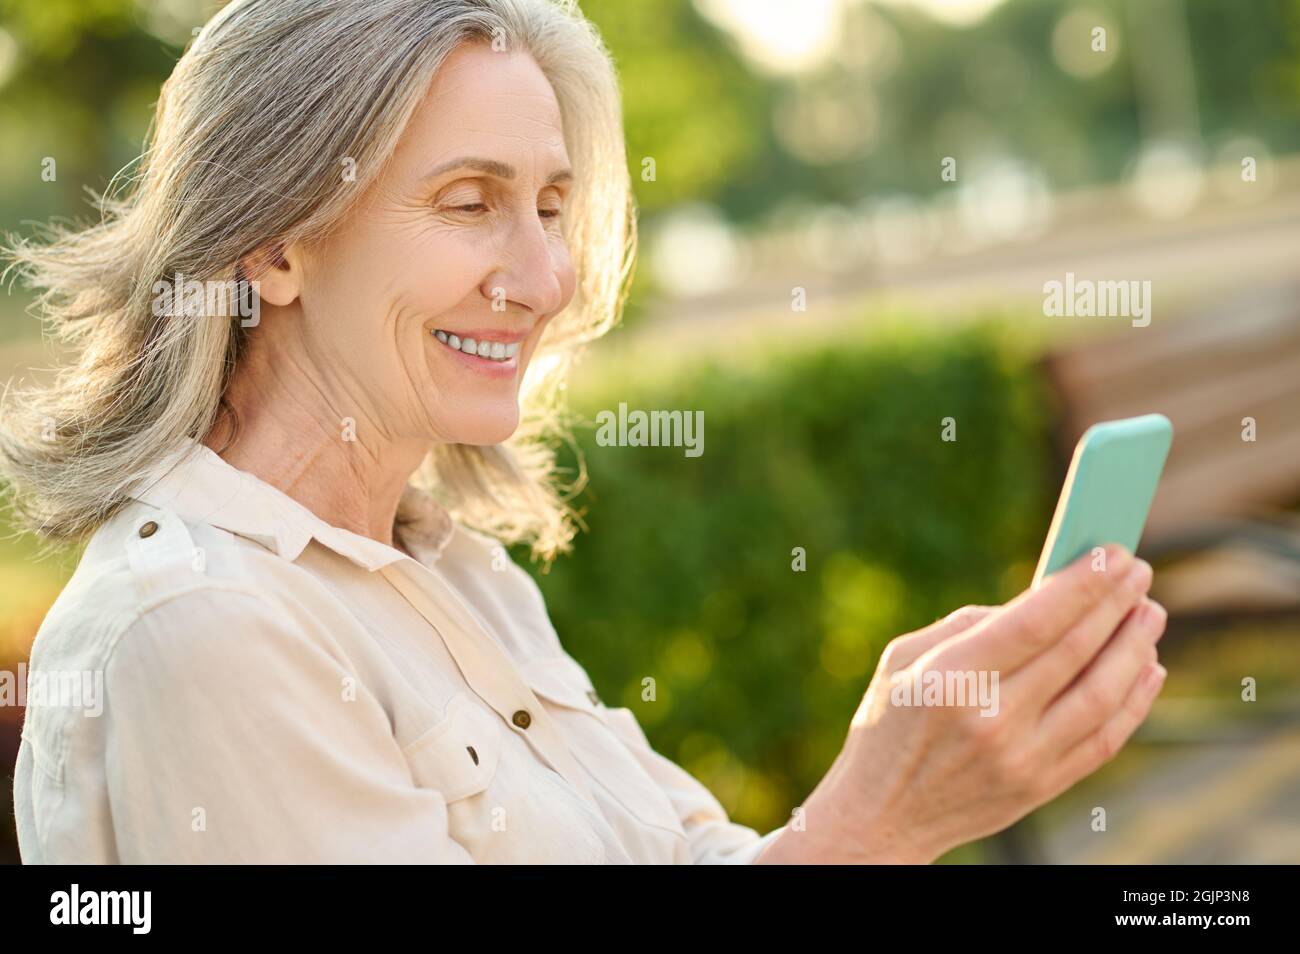 Smiling adult woman with smartphone in park Stock Photo